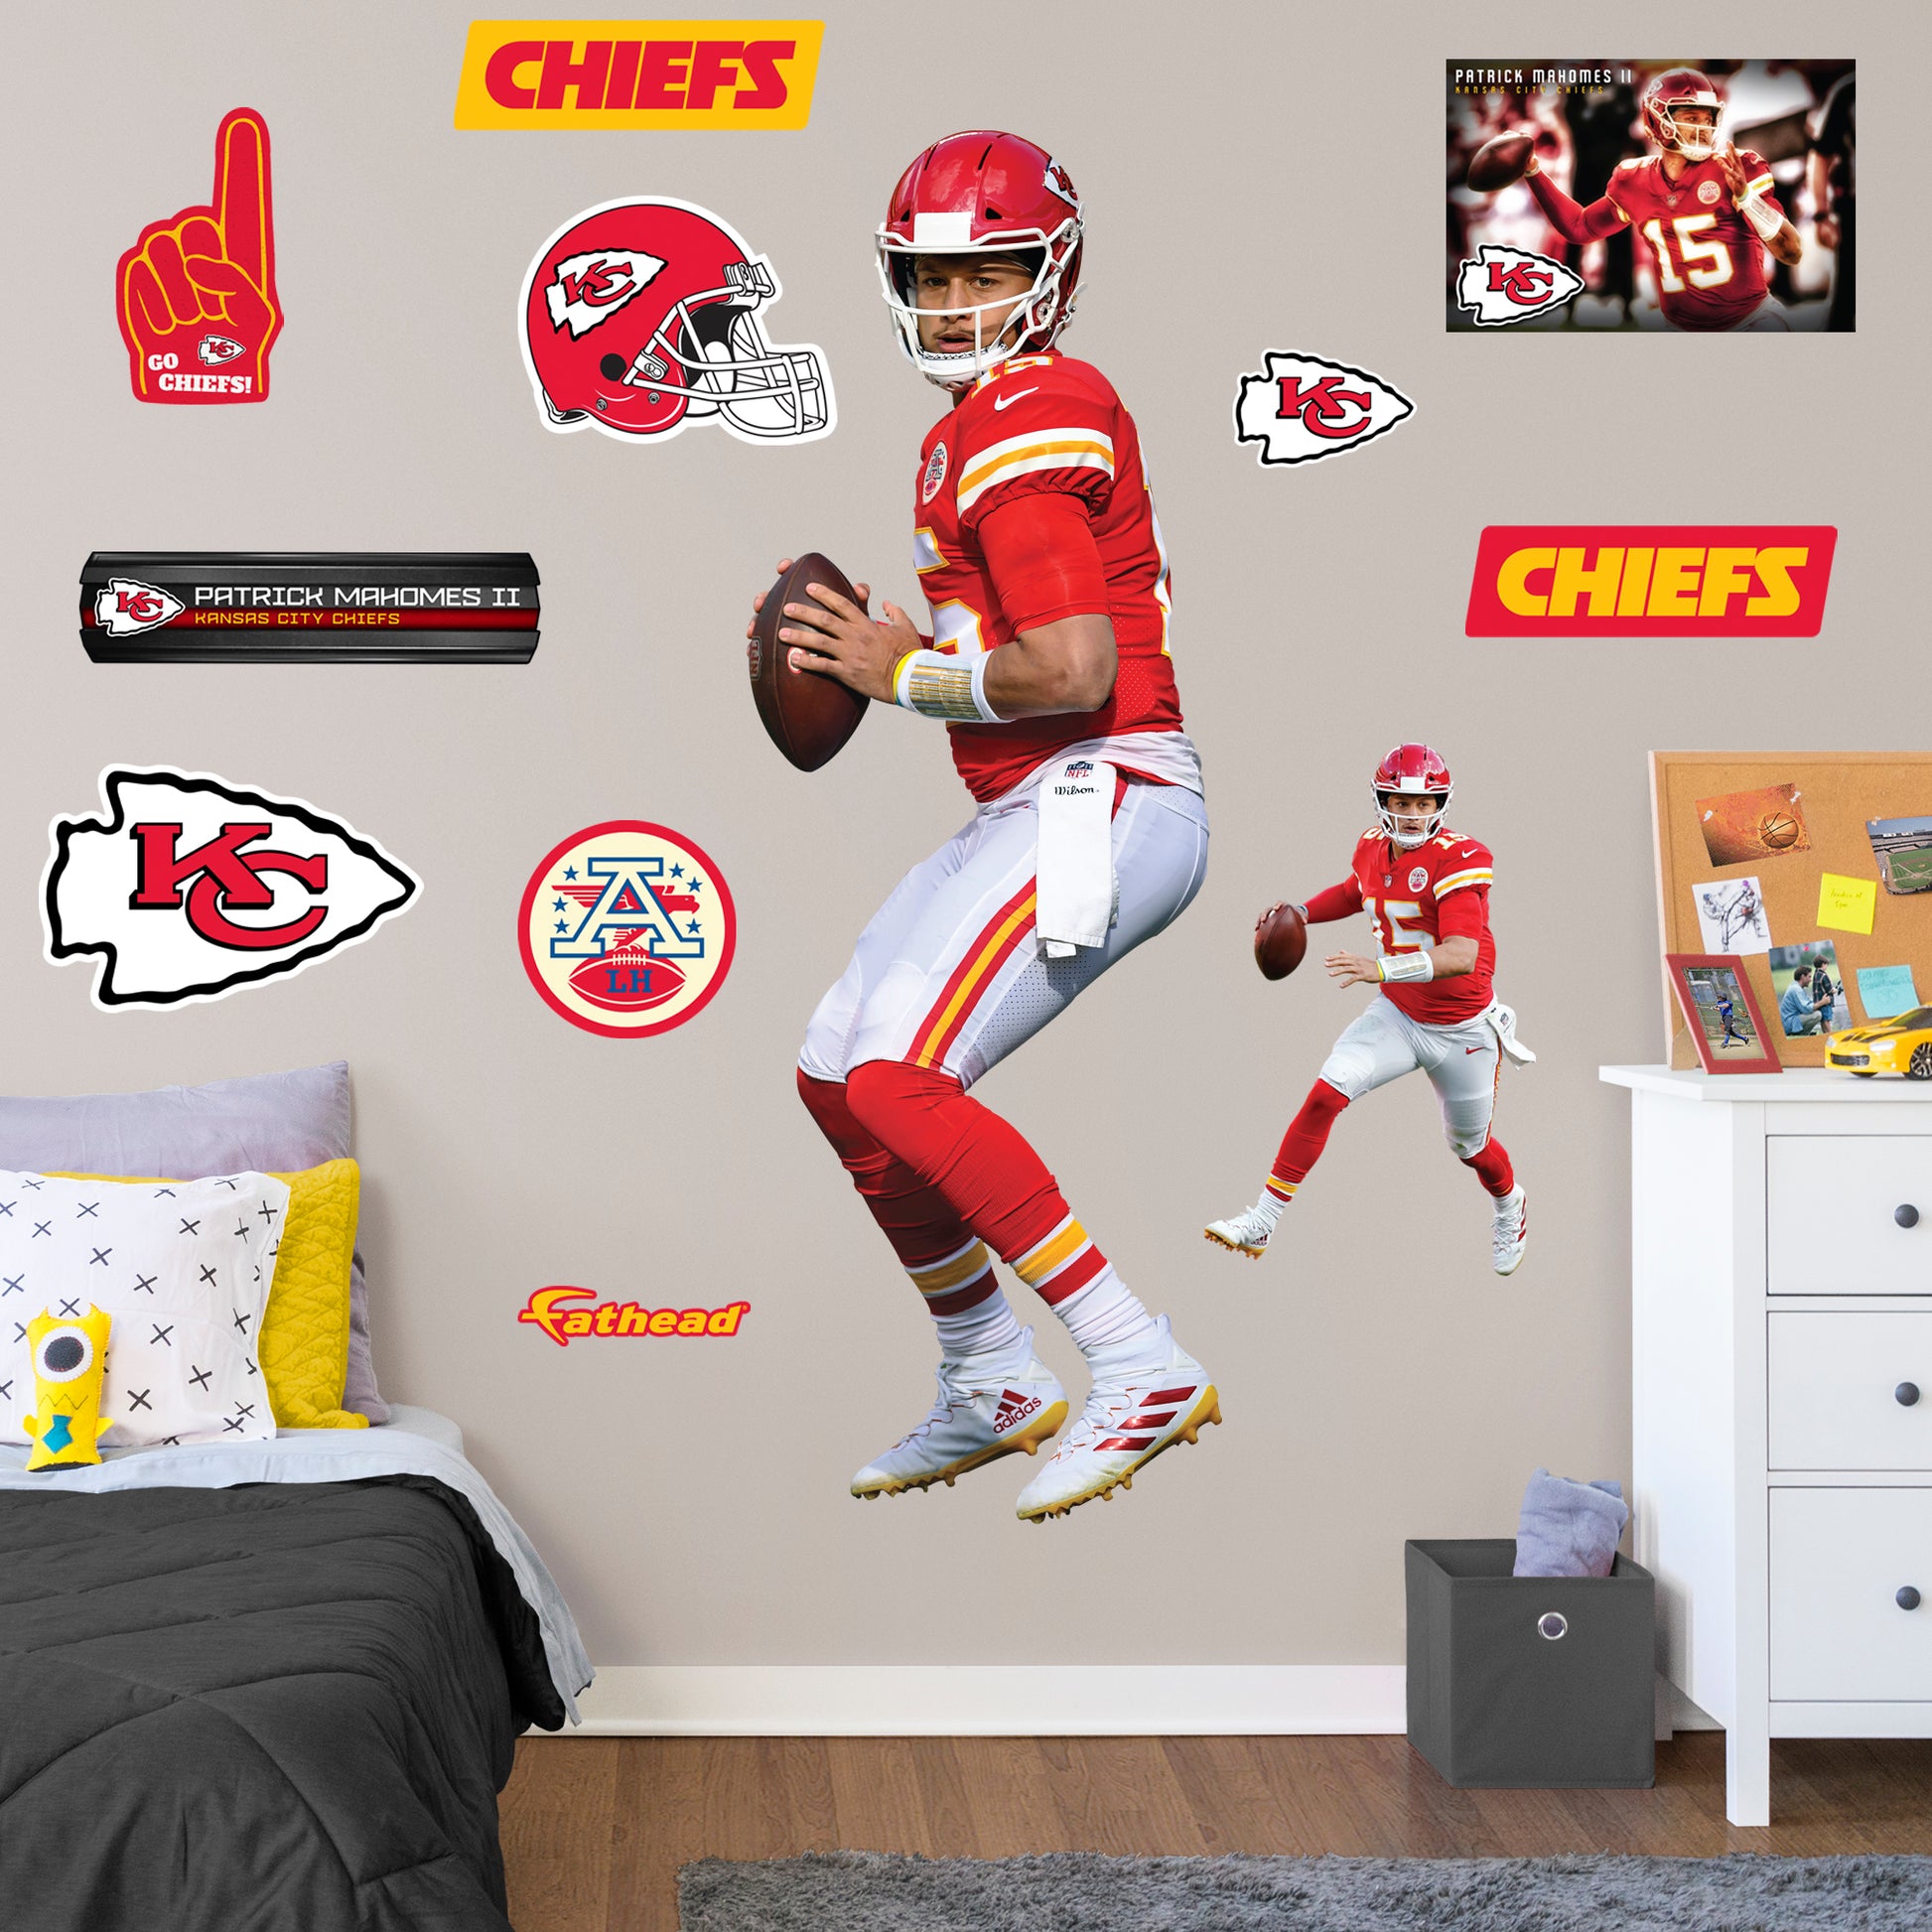 Life-Size Athlete + 11 Decals (26"W x 76"H) Bring the action of the NFL into your home with a wall decal of Patrick Mahomes! High quality, durable, and tear resistant, you'll be able to stick and move it as many times as you want to create the ultimate football experience in any room!